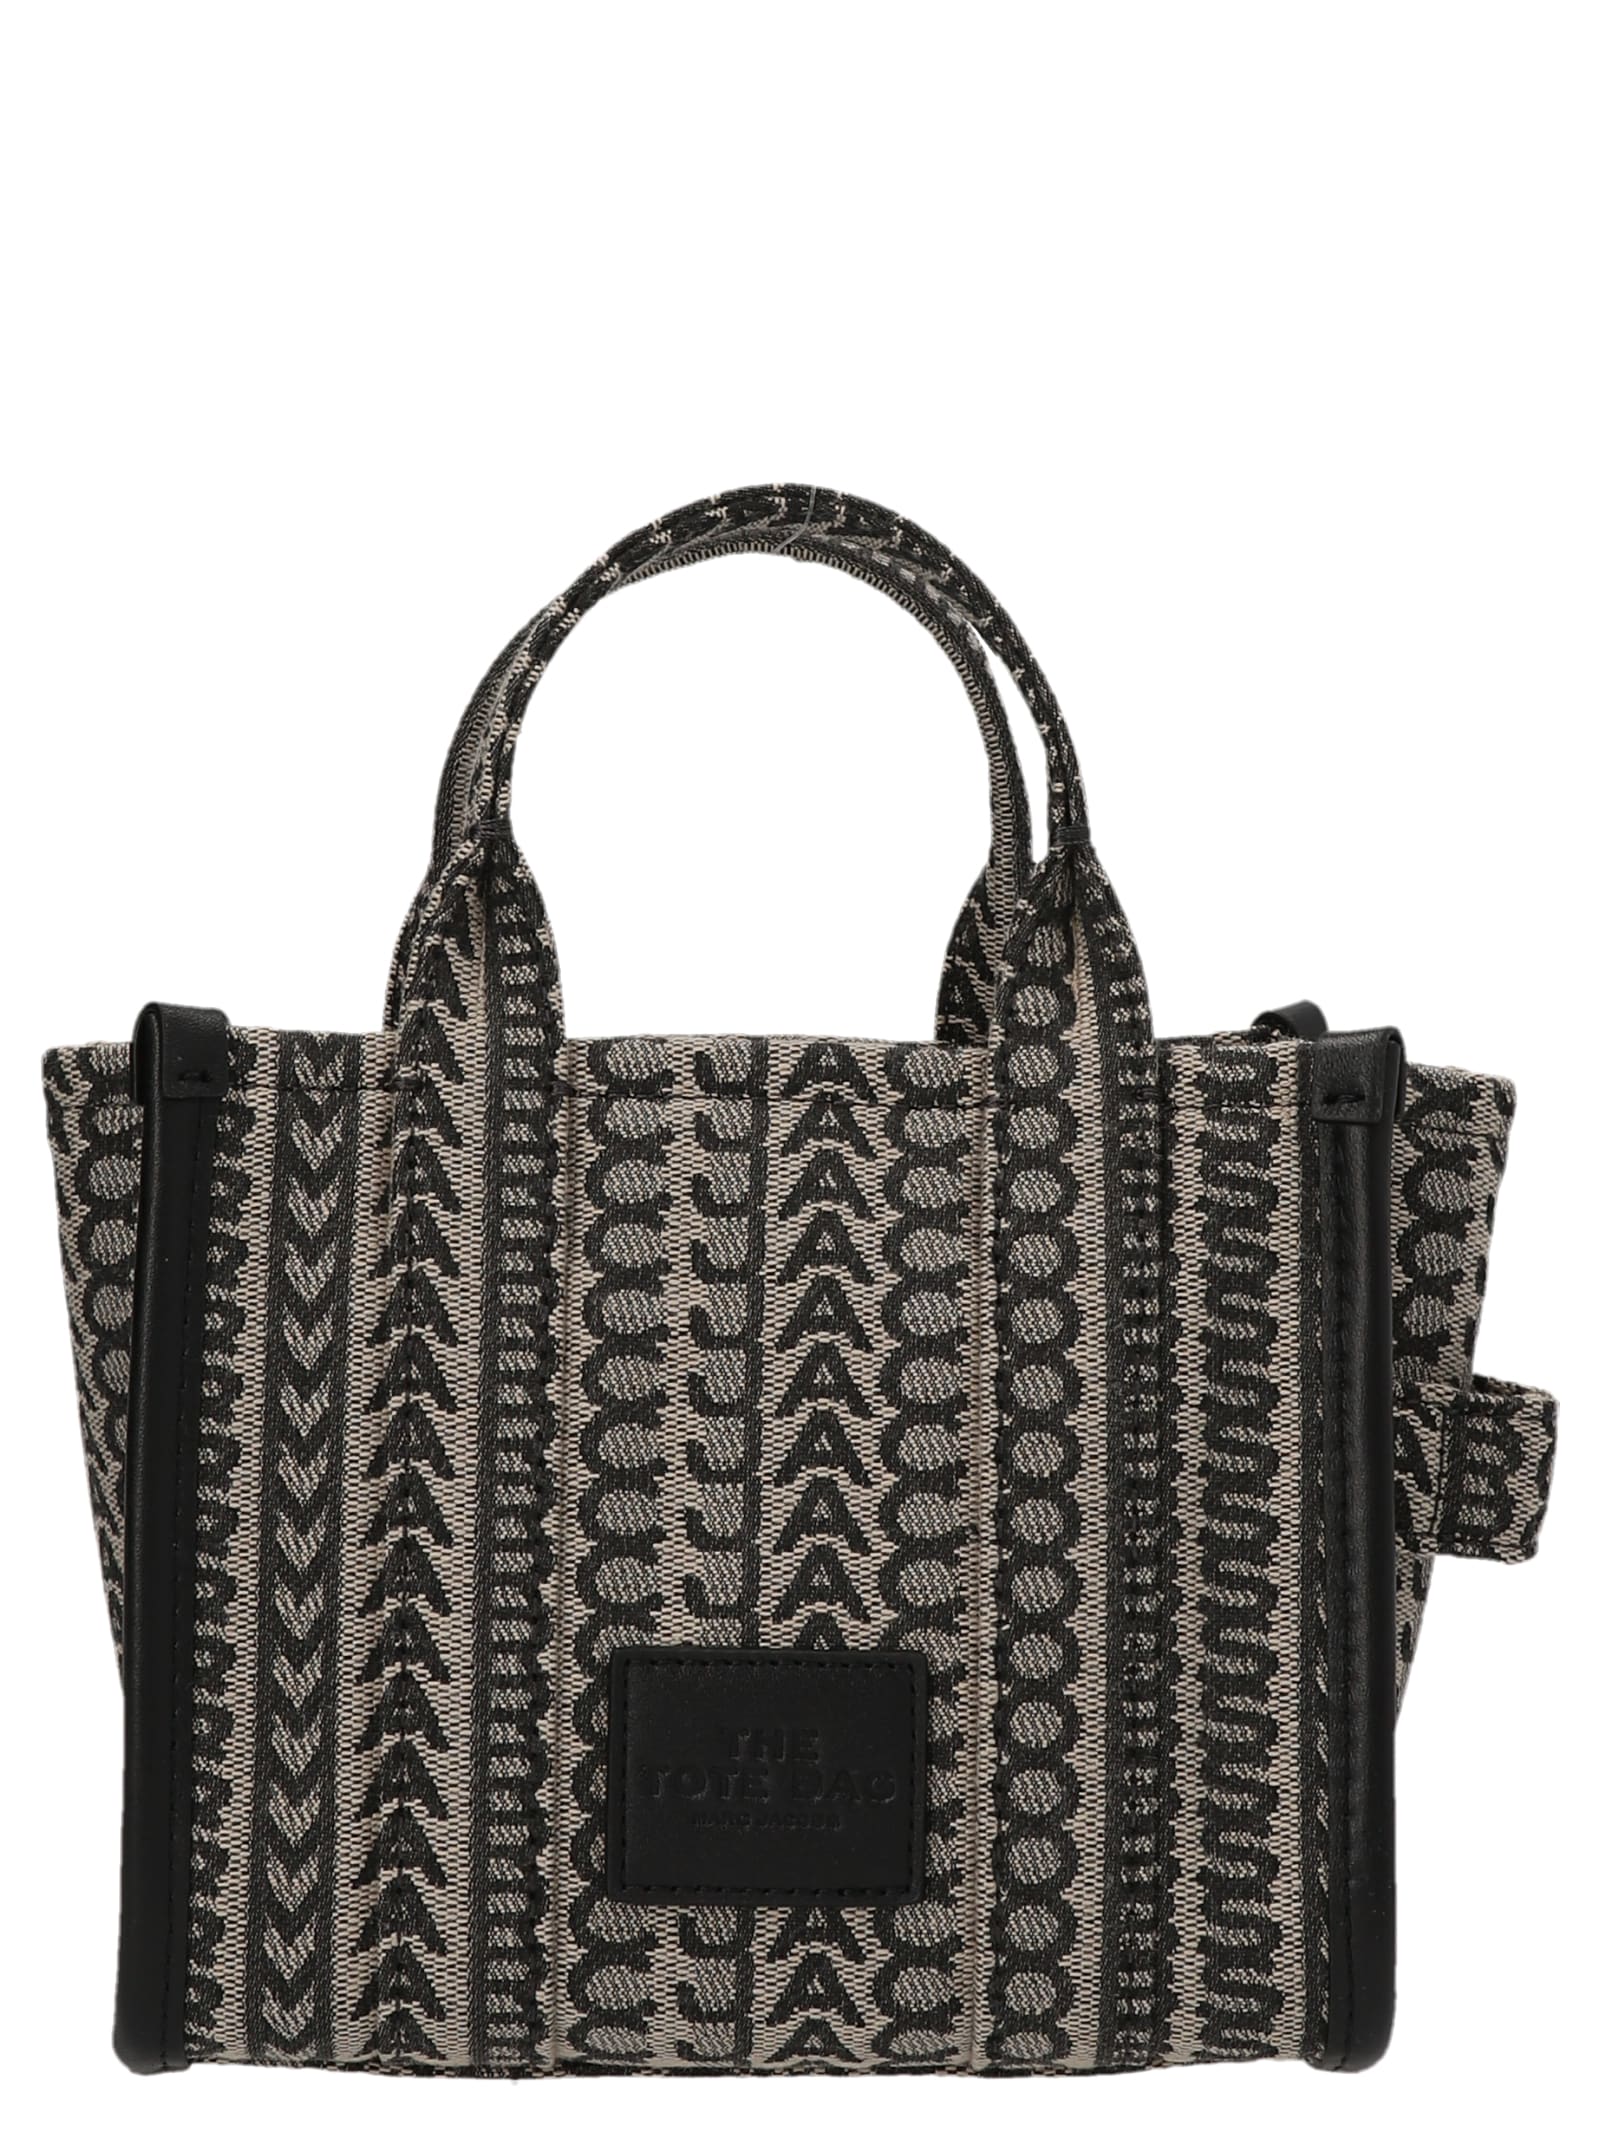 Marc Jacobs The Tote Bag Tote